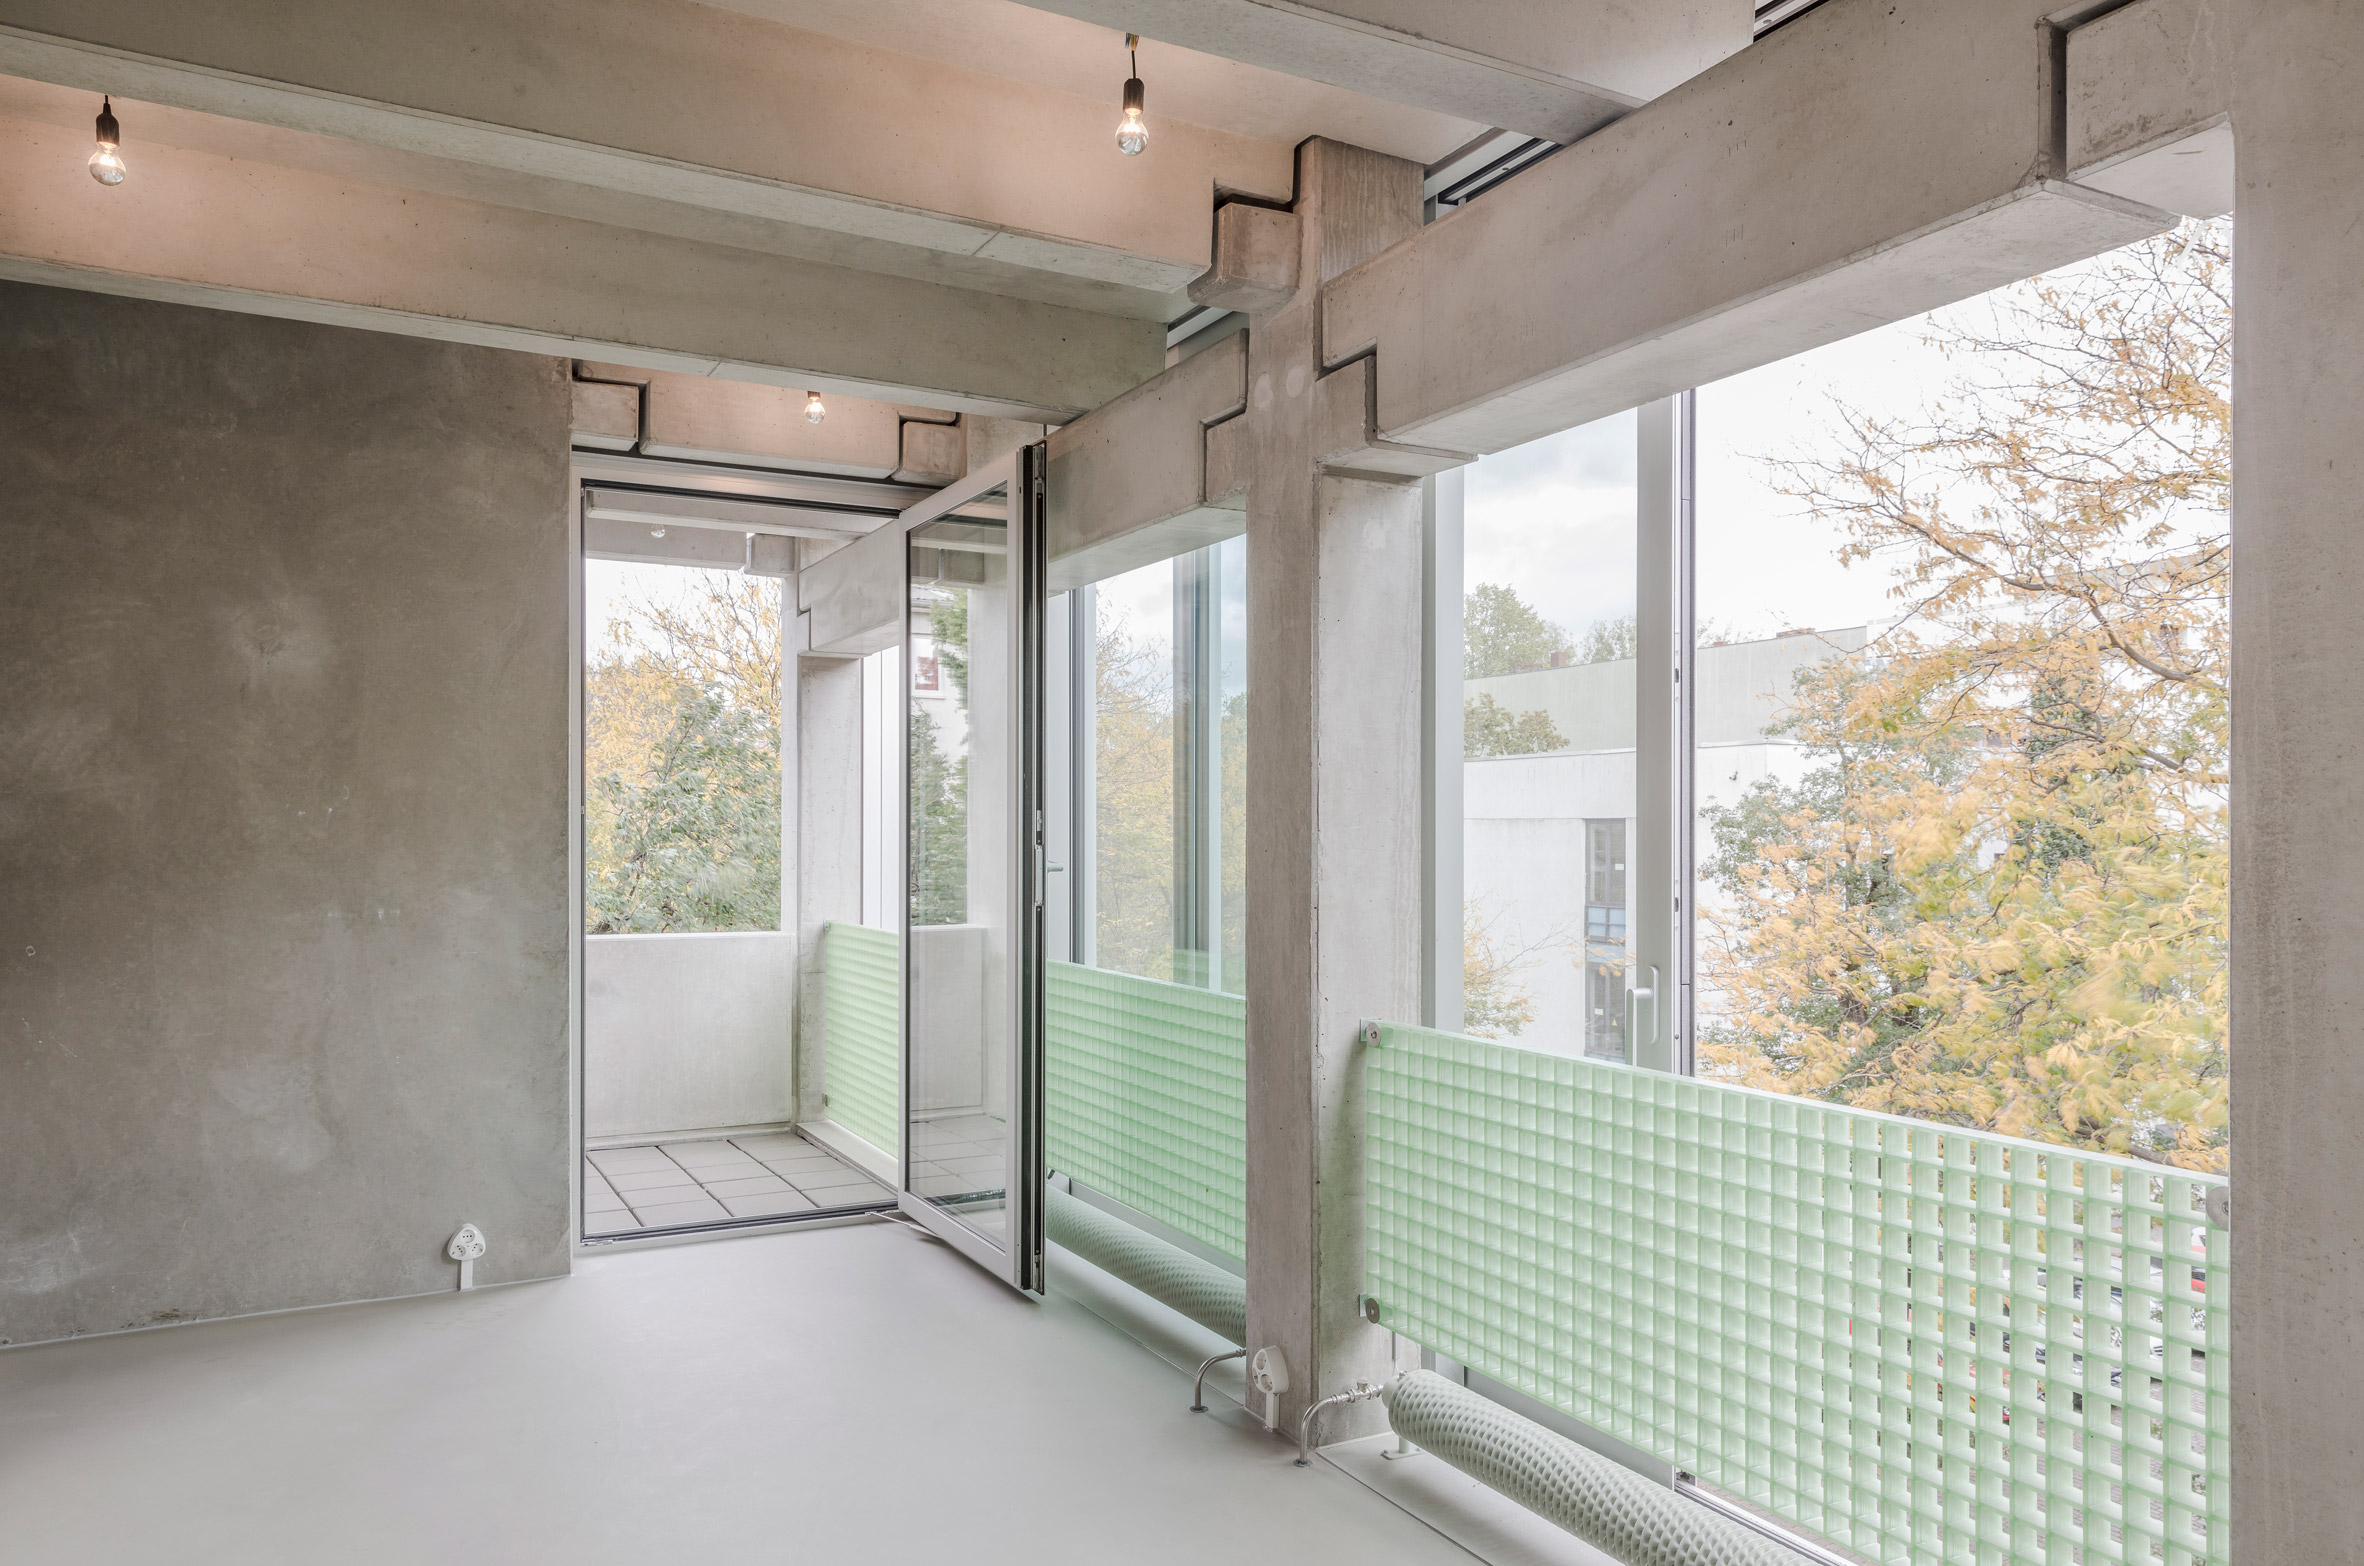 Interior of Wohnregal prefabricated concrete housing block by FAR in Berlin, Germany